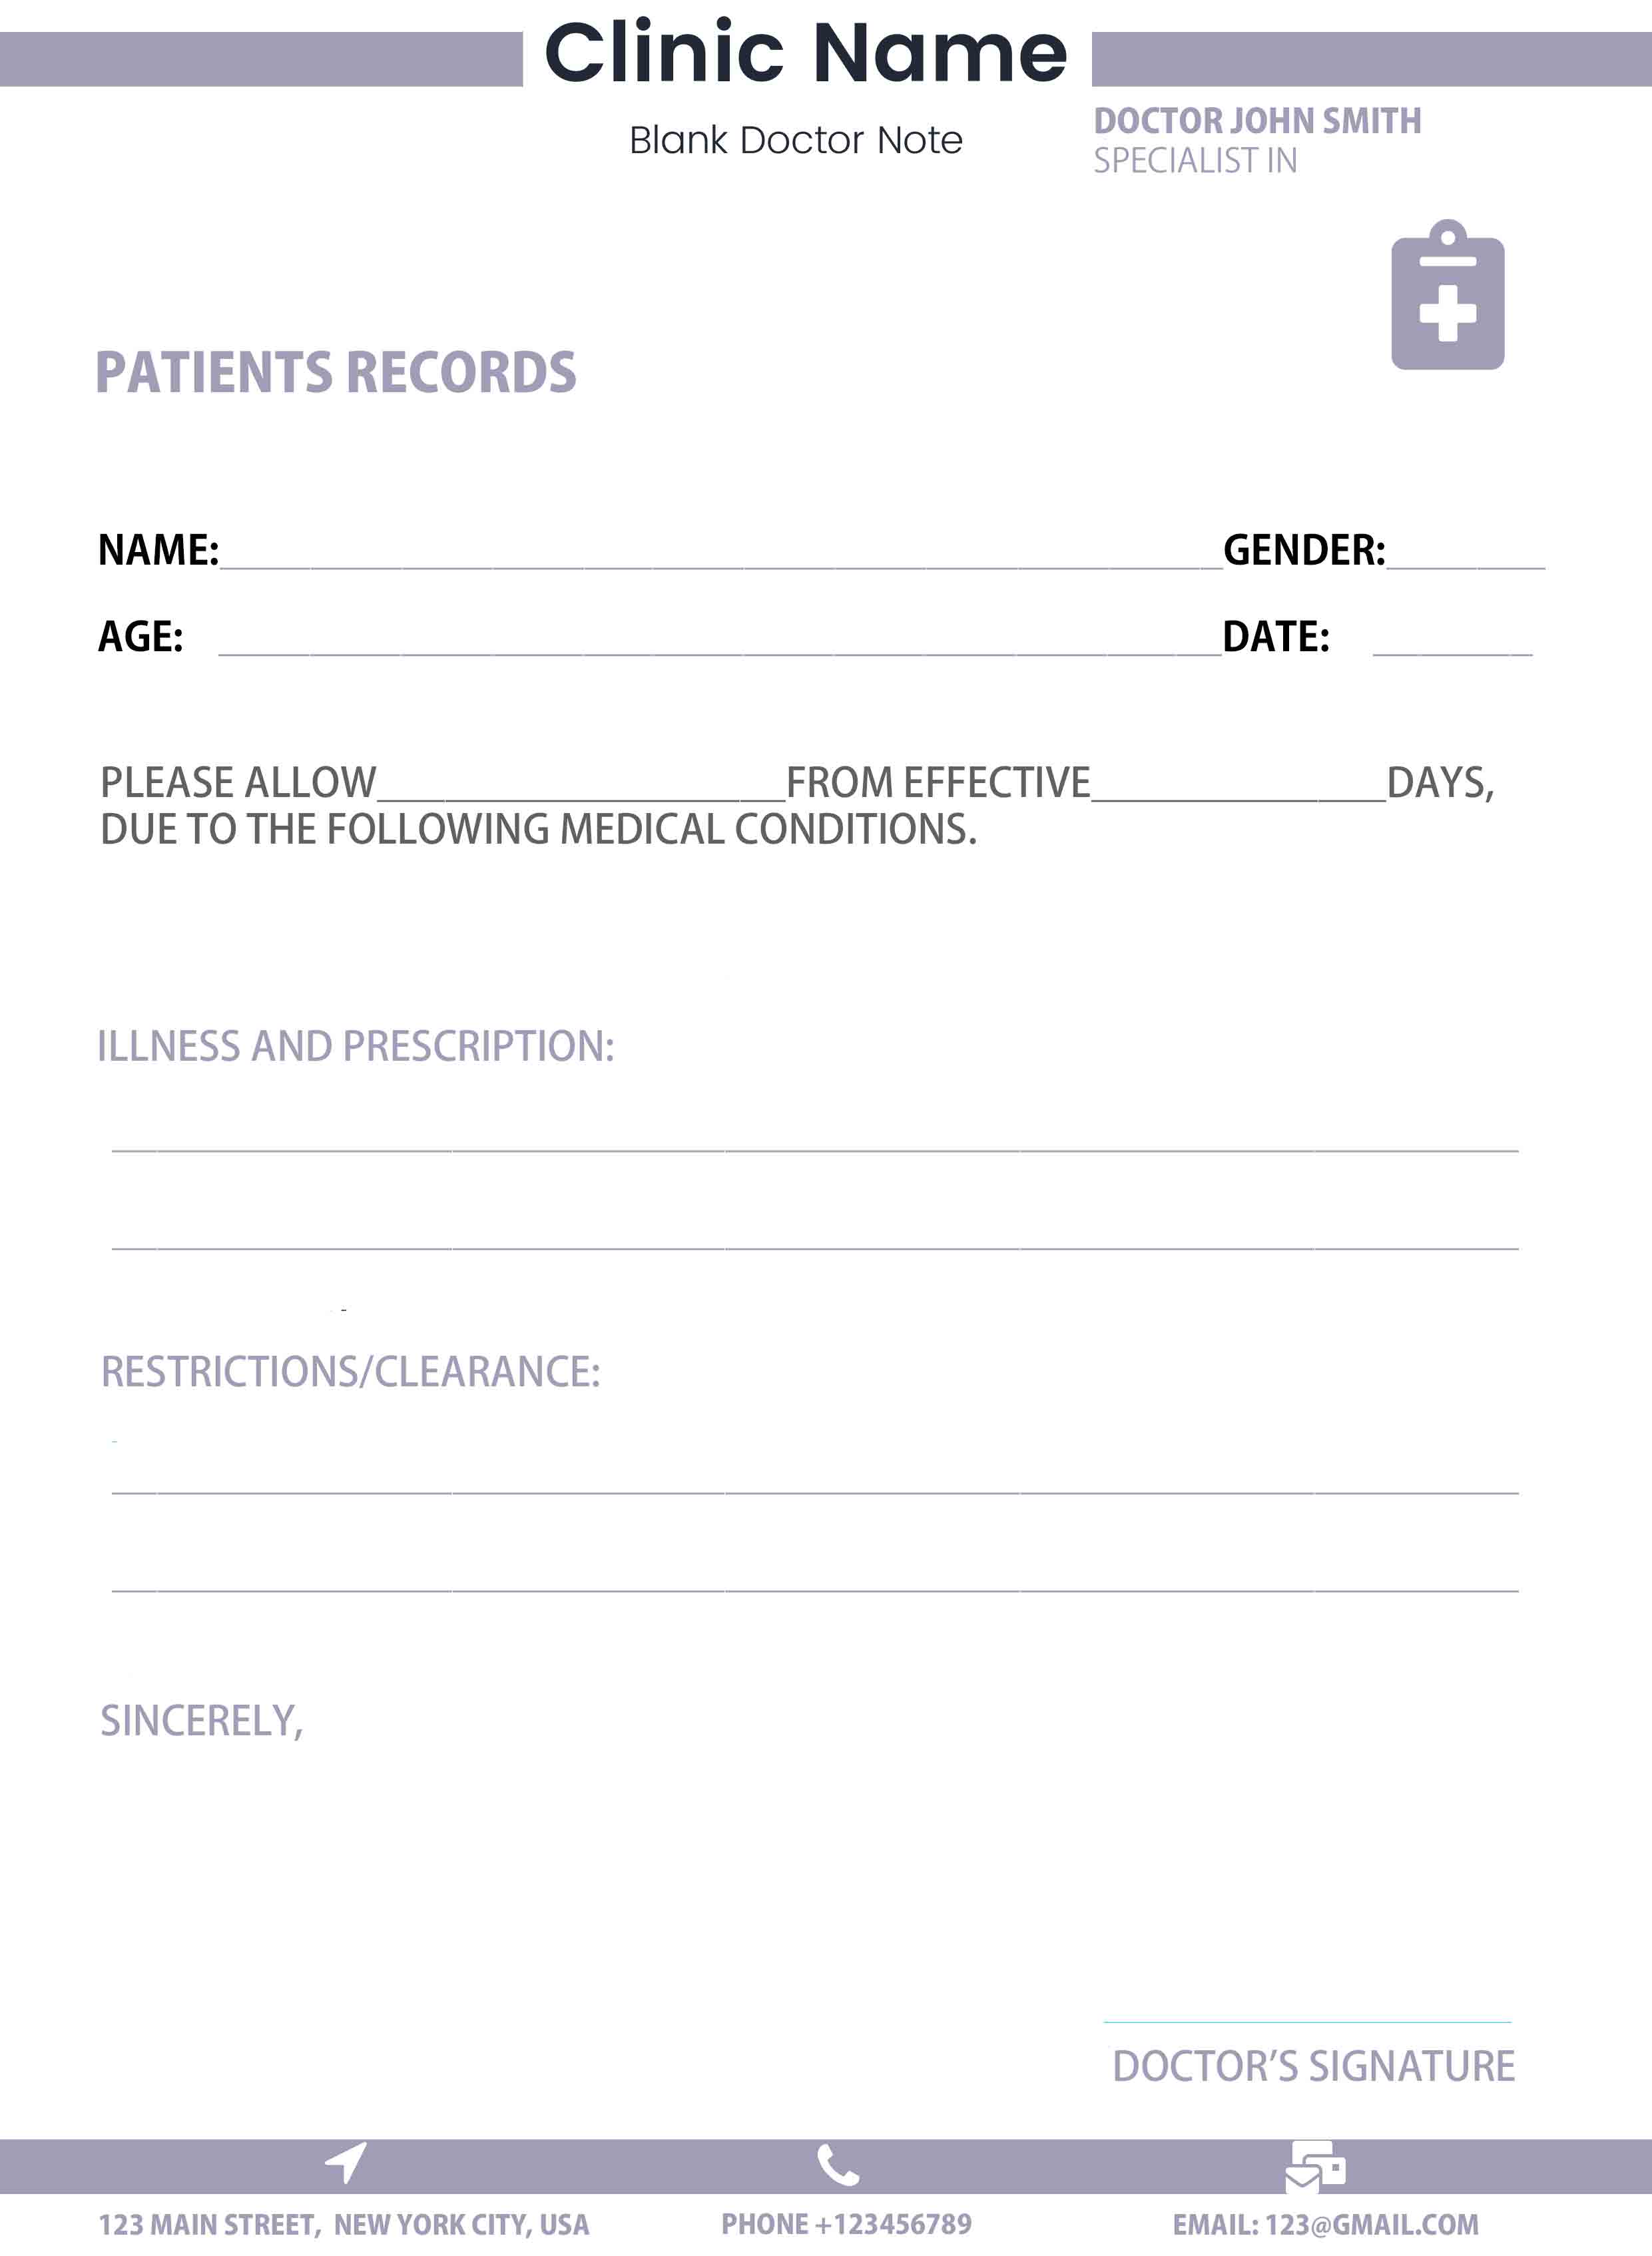 Download Free Doctor Note Template